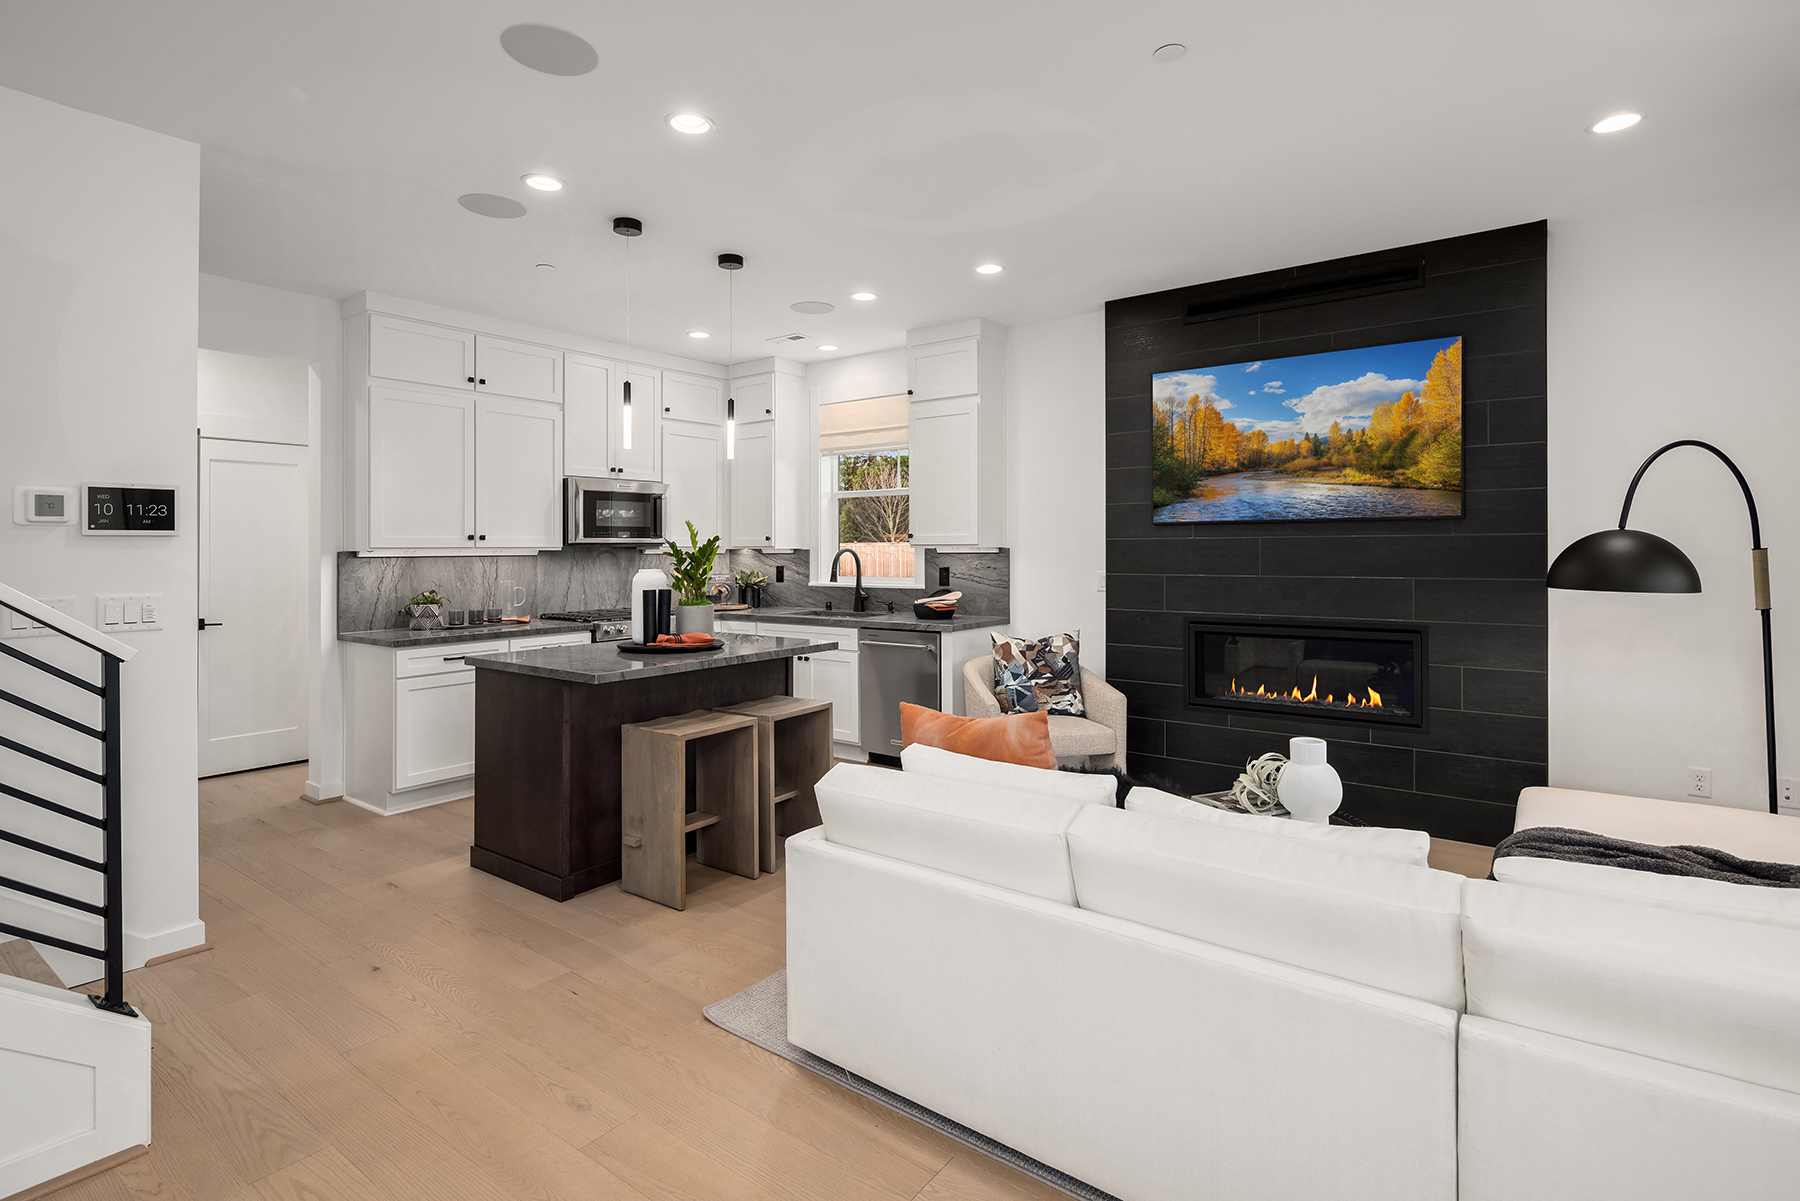 Toll Brothers Announces Model Home Grand Opening at Centre Cottages in Kirkland, Washington